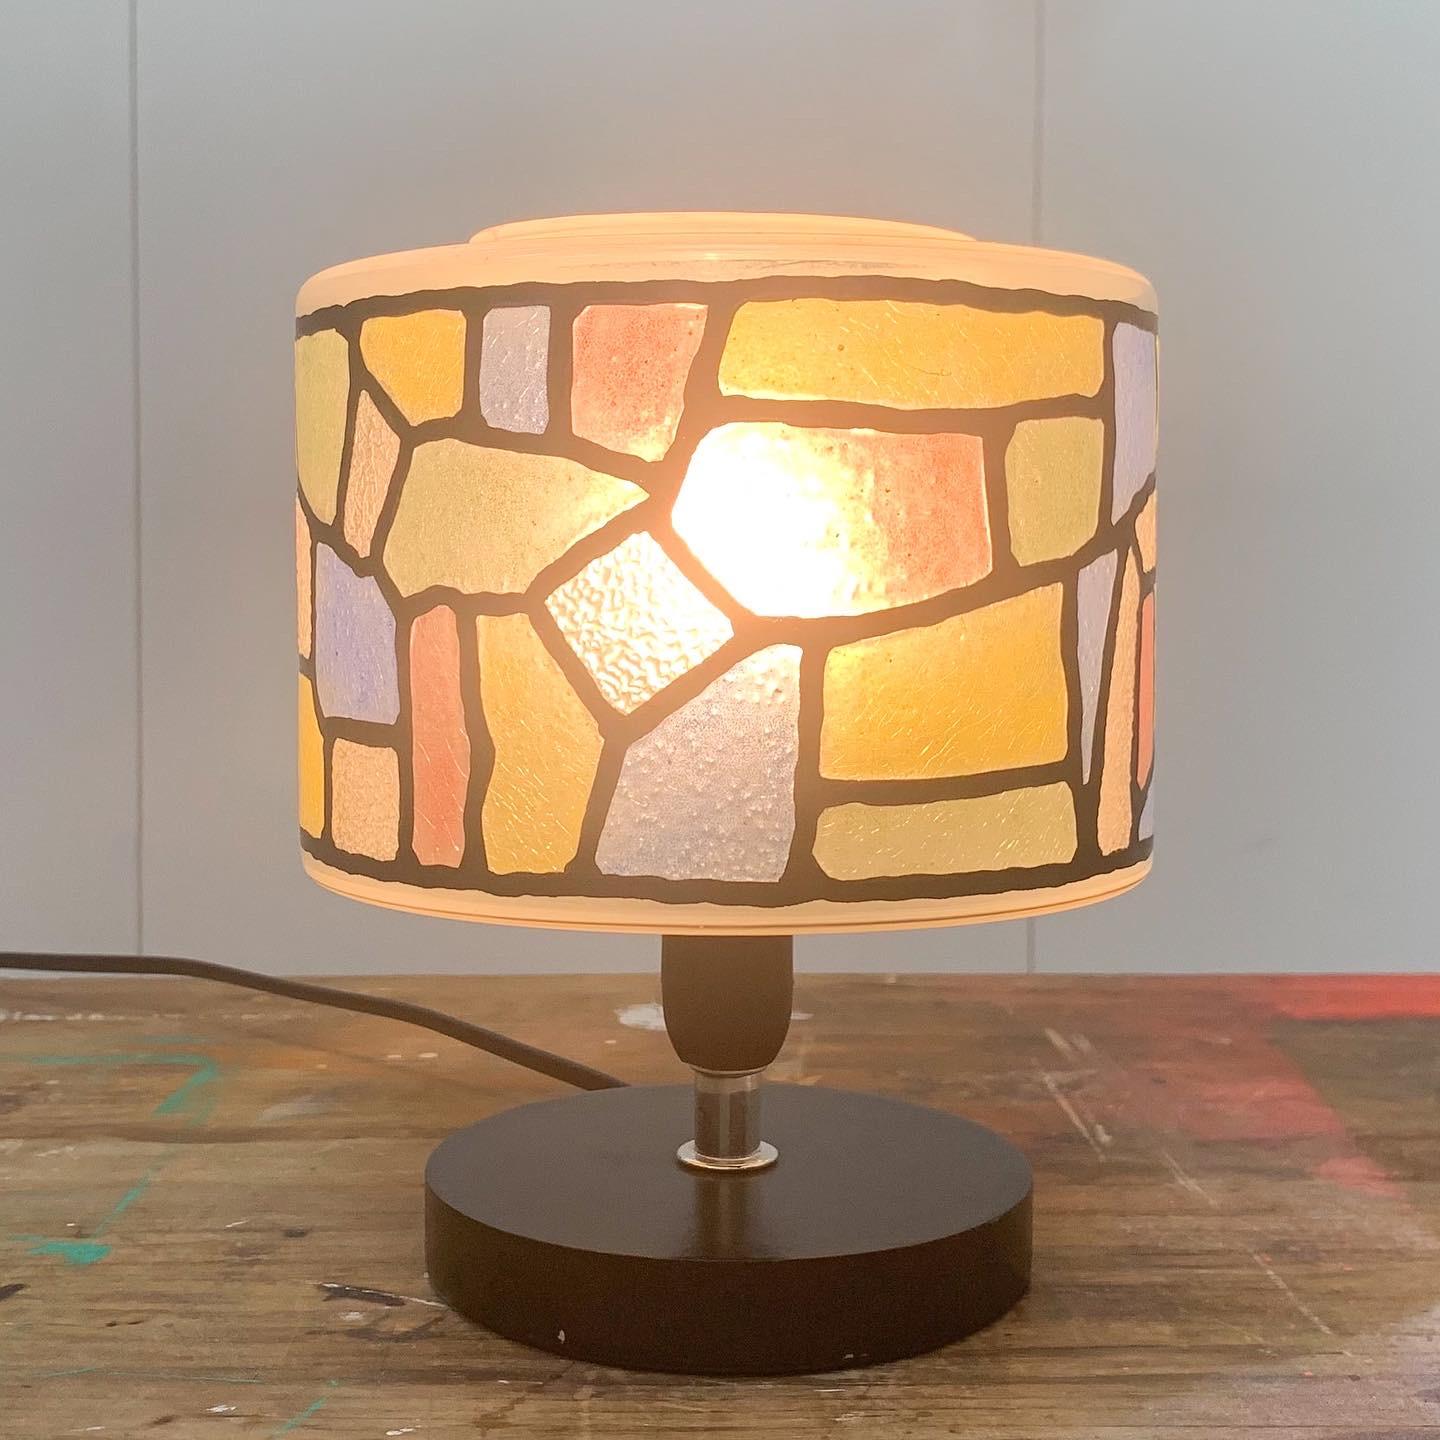 Small Art Deco Style Table Lamp With Stained Glass Shade - British, C1990s

Great colours on the shade!